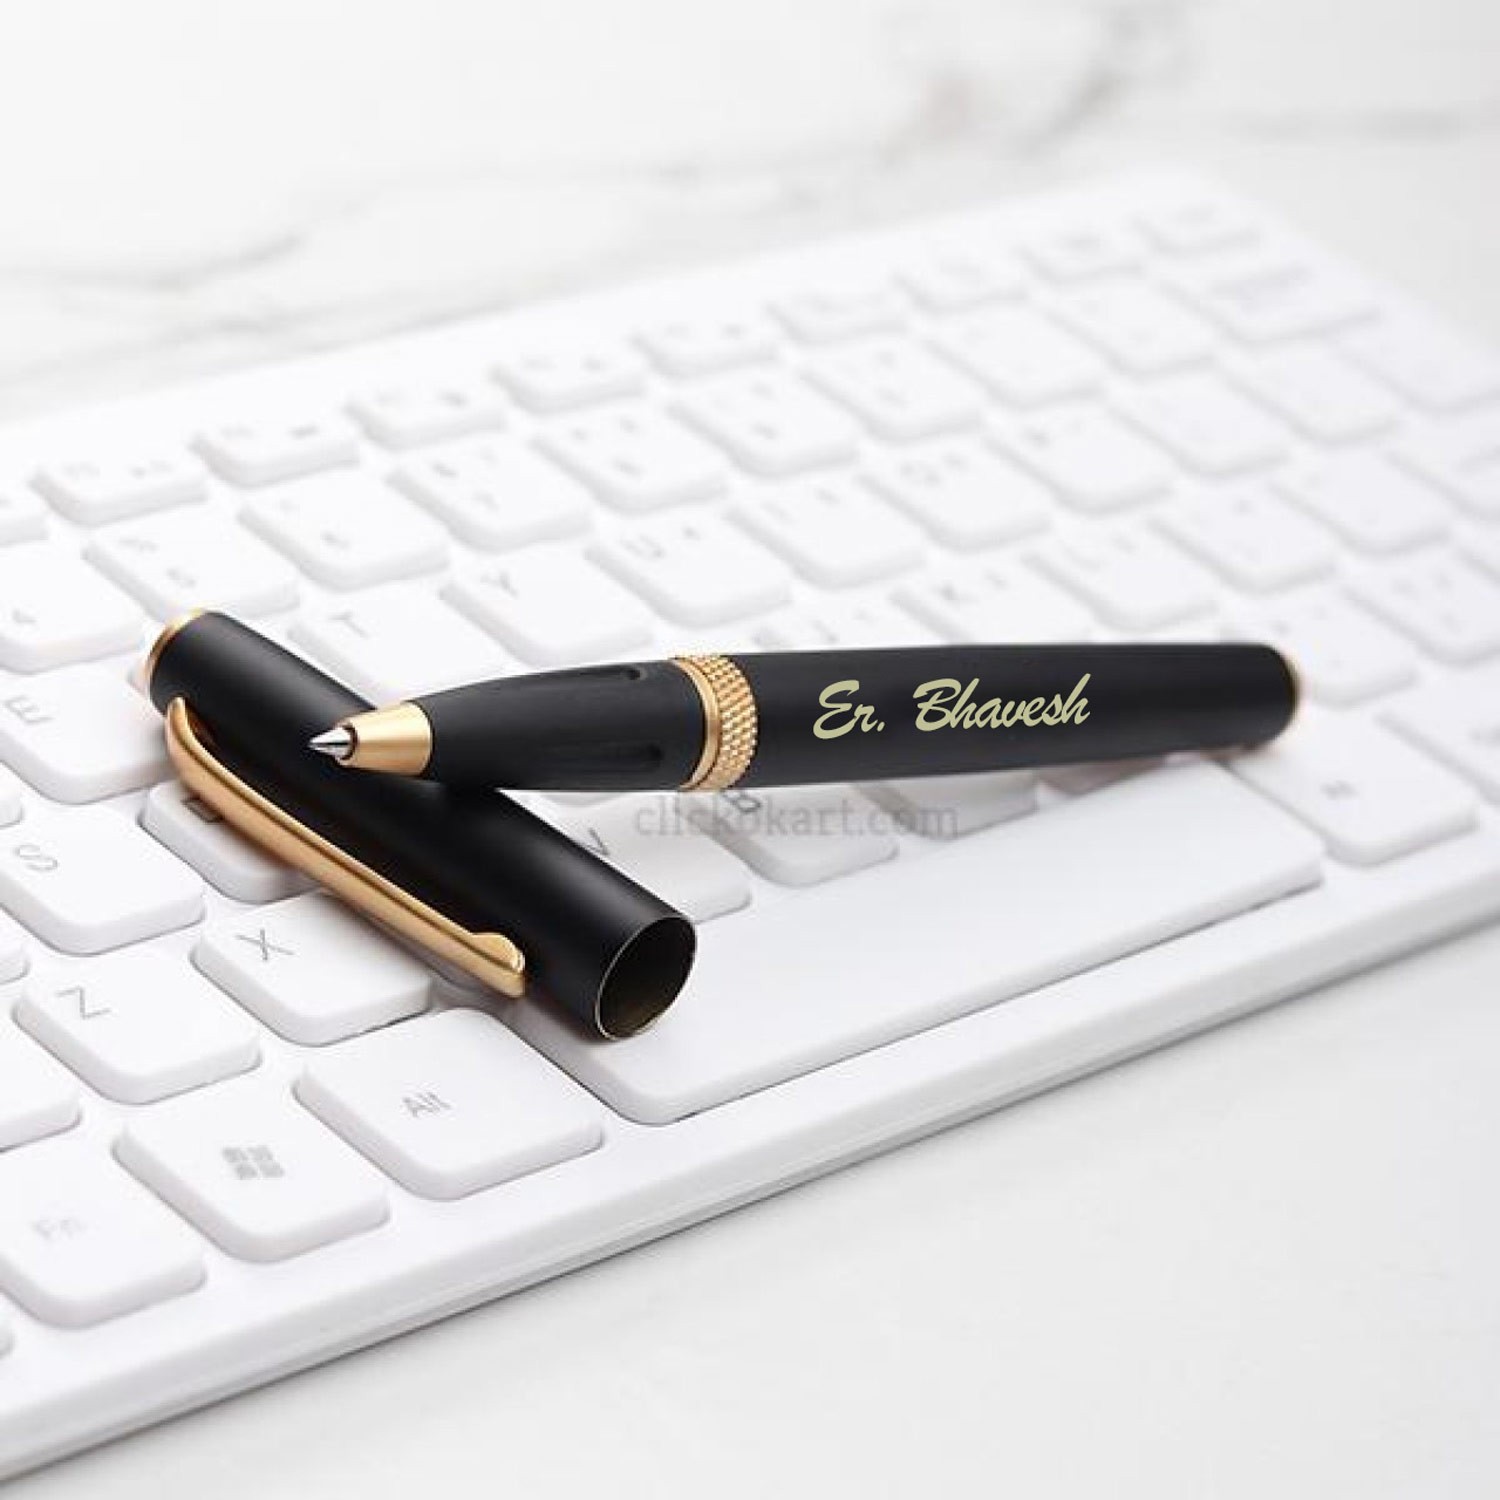 Giftana Personalized Pen with Name, Customized Pen with Box on Both, Brown  Body Metal Ballpoint Pen Gift for Official Usage, Gifts for Anniversary,  Teacher's Day Gifts, Birthday Gifts for Everyone : Amazon.in: